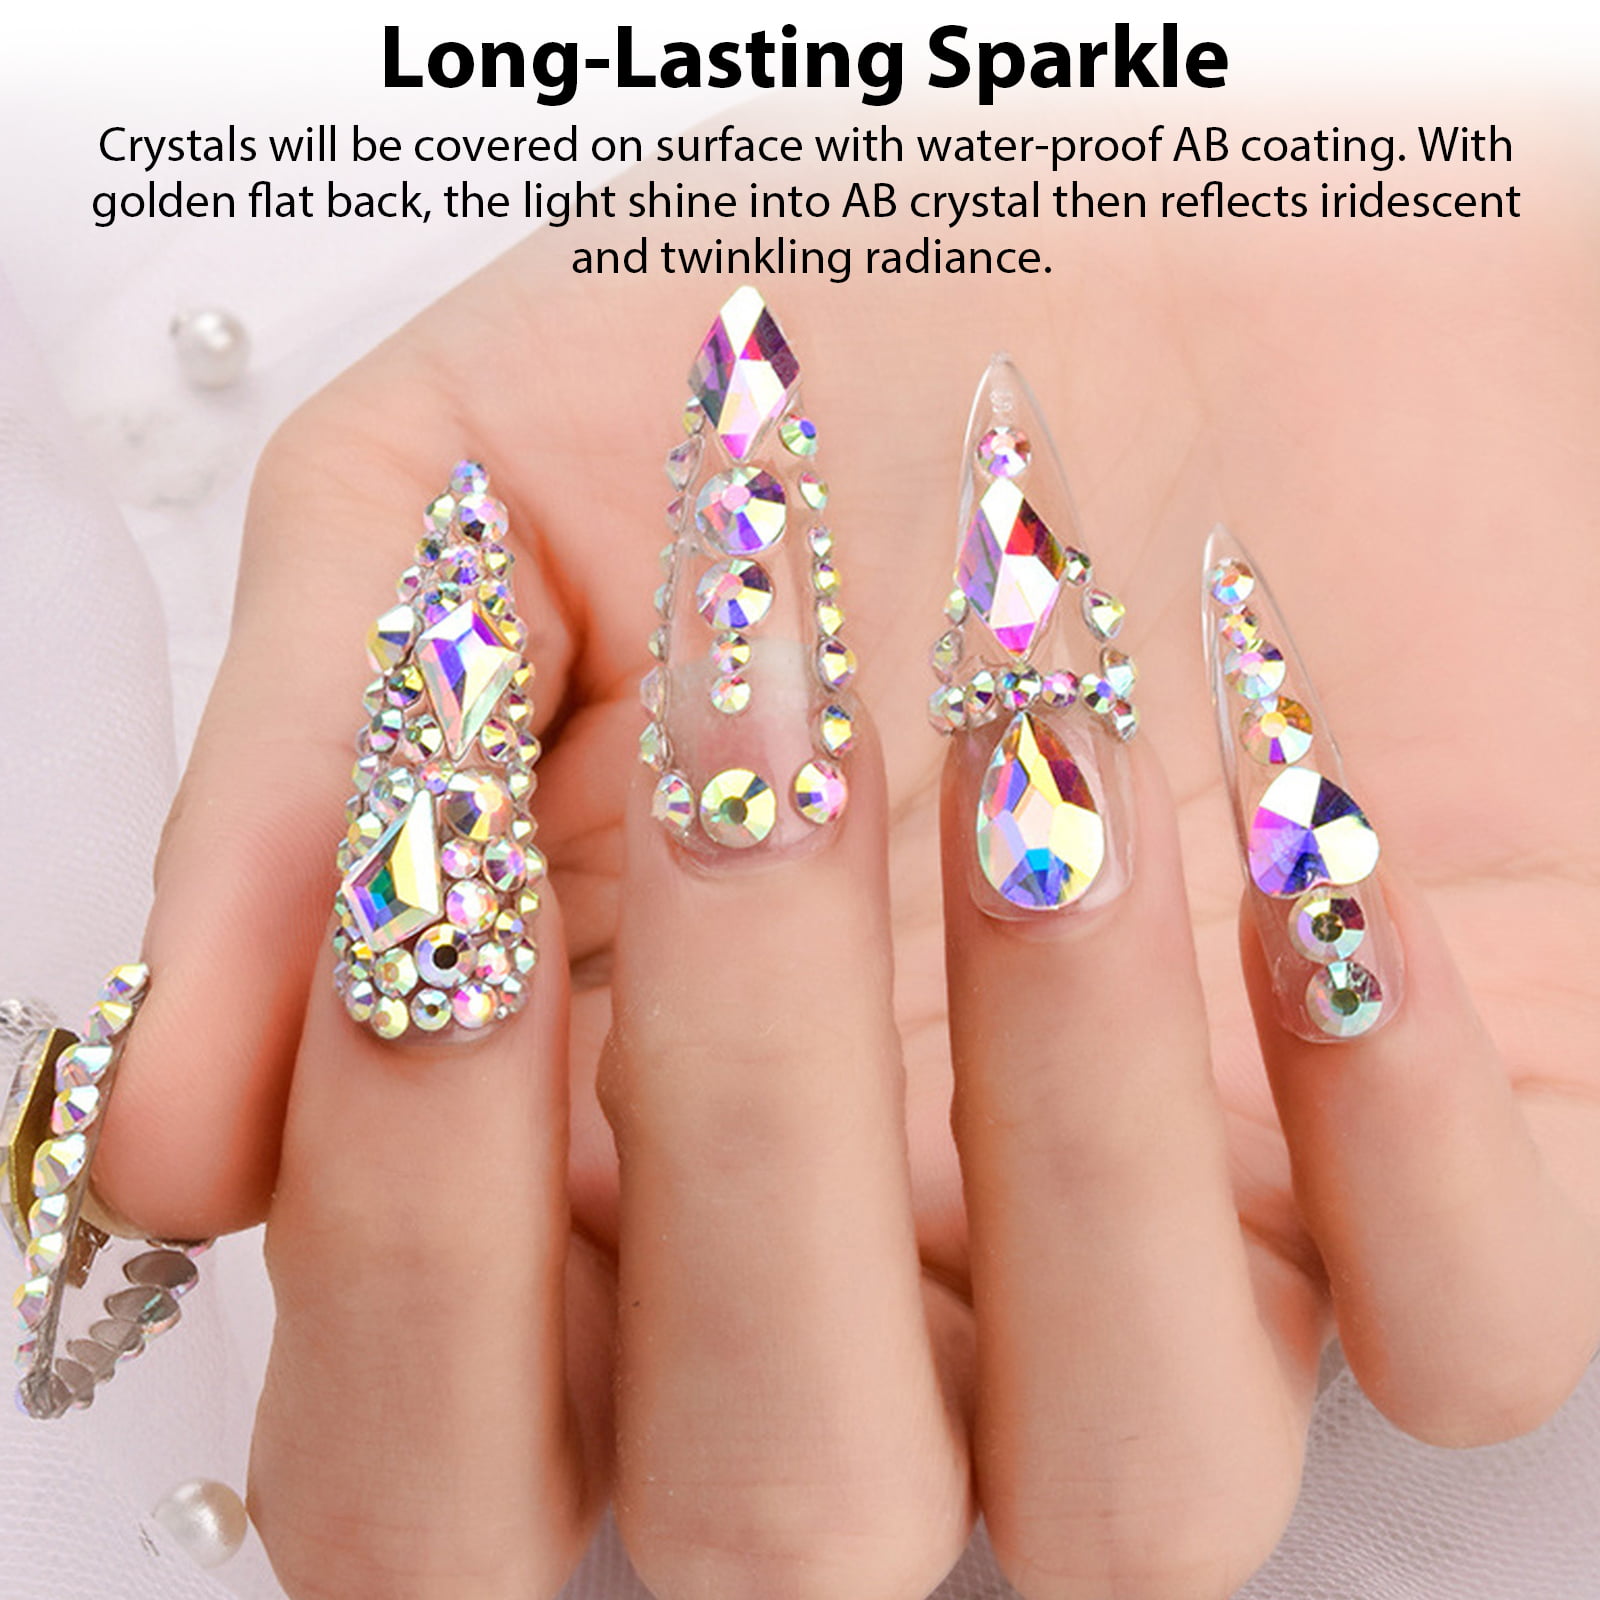 Casted Metal, Acrylic Crystal Stone Multi Ring Set 10pc - Wild Fable™ Gold 7